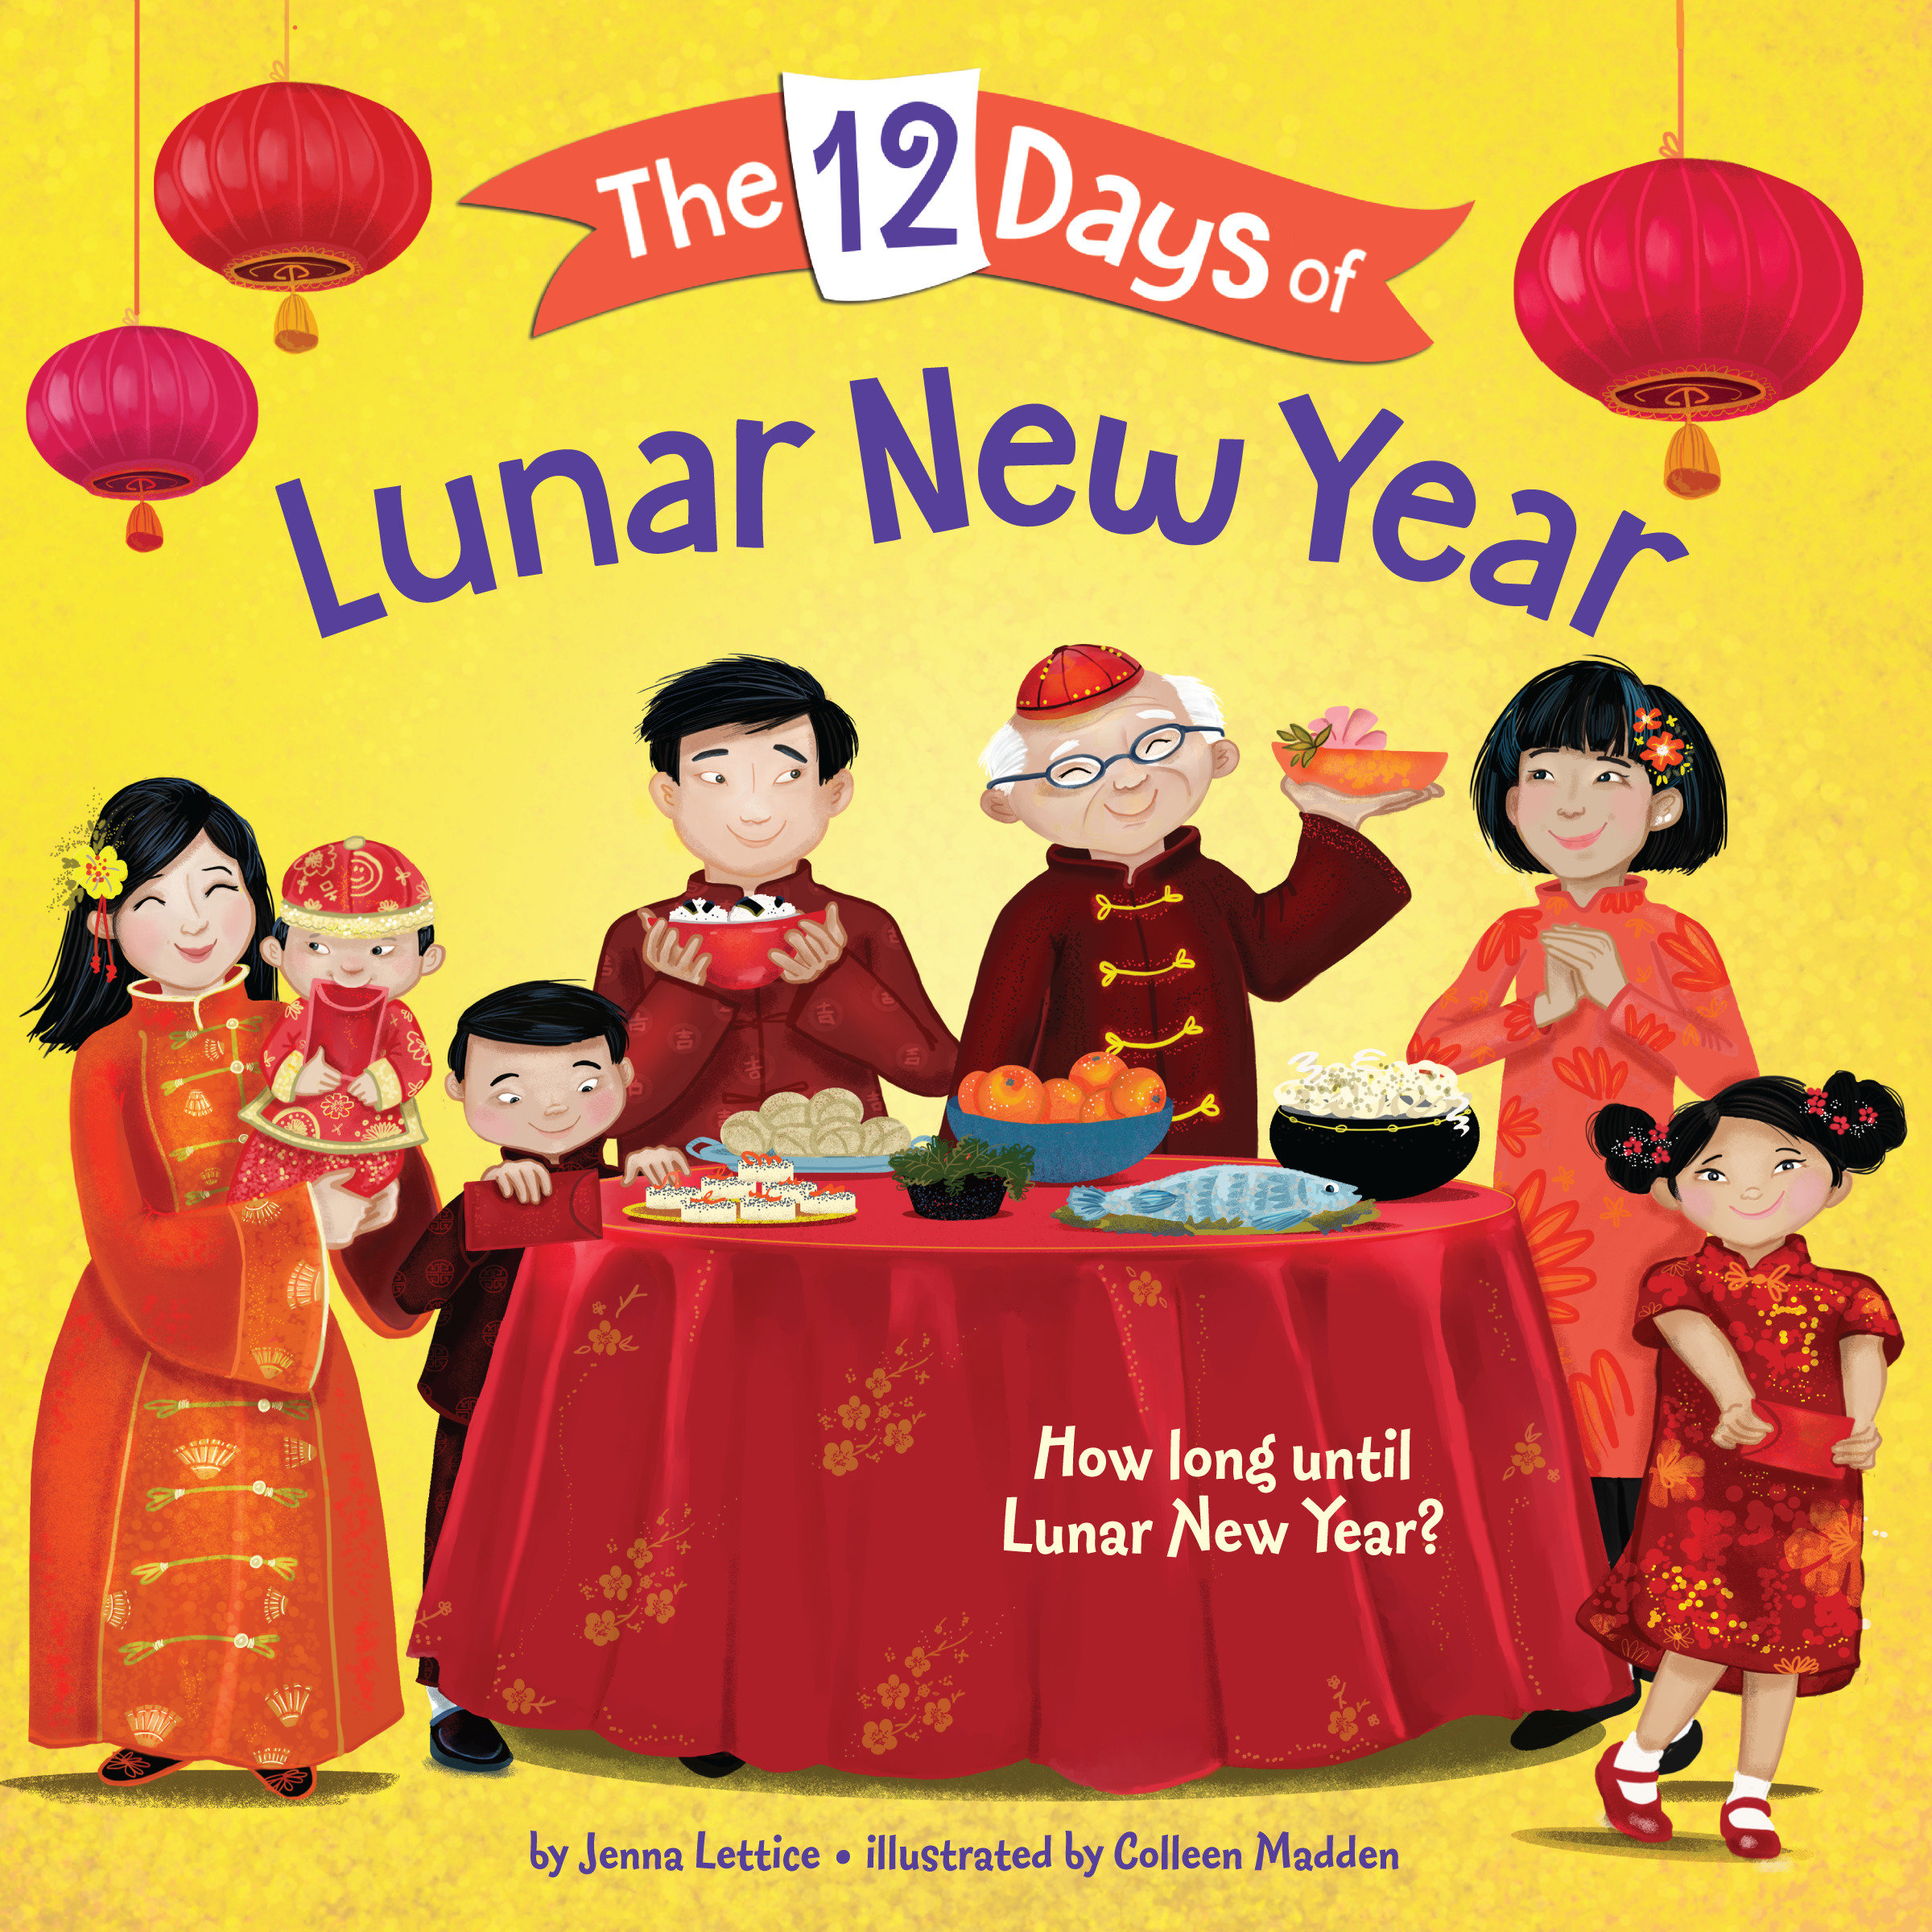 The 12 Days Of Lunar New Year by Jenna Lettice